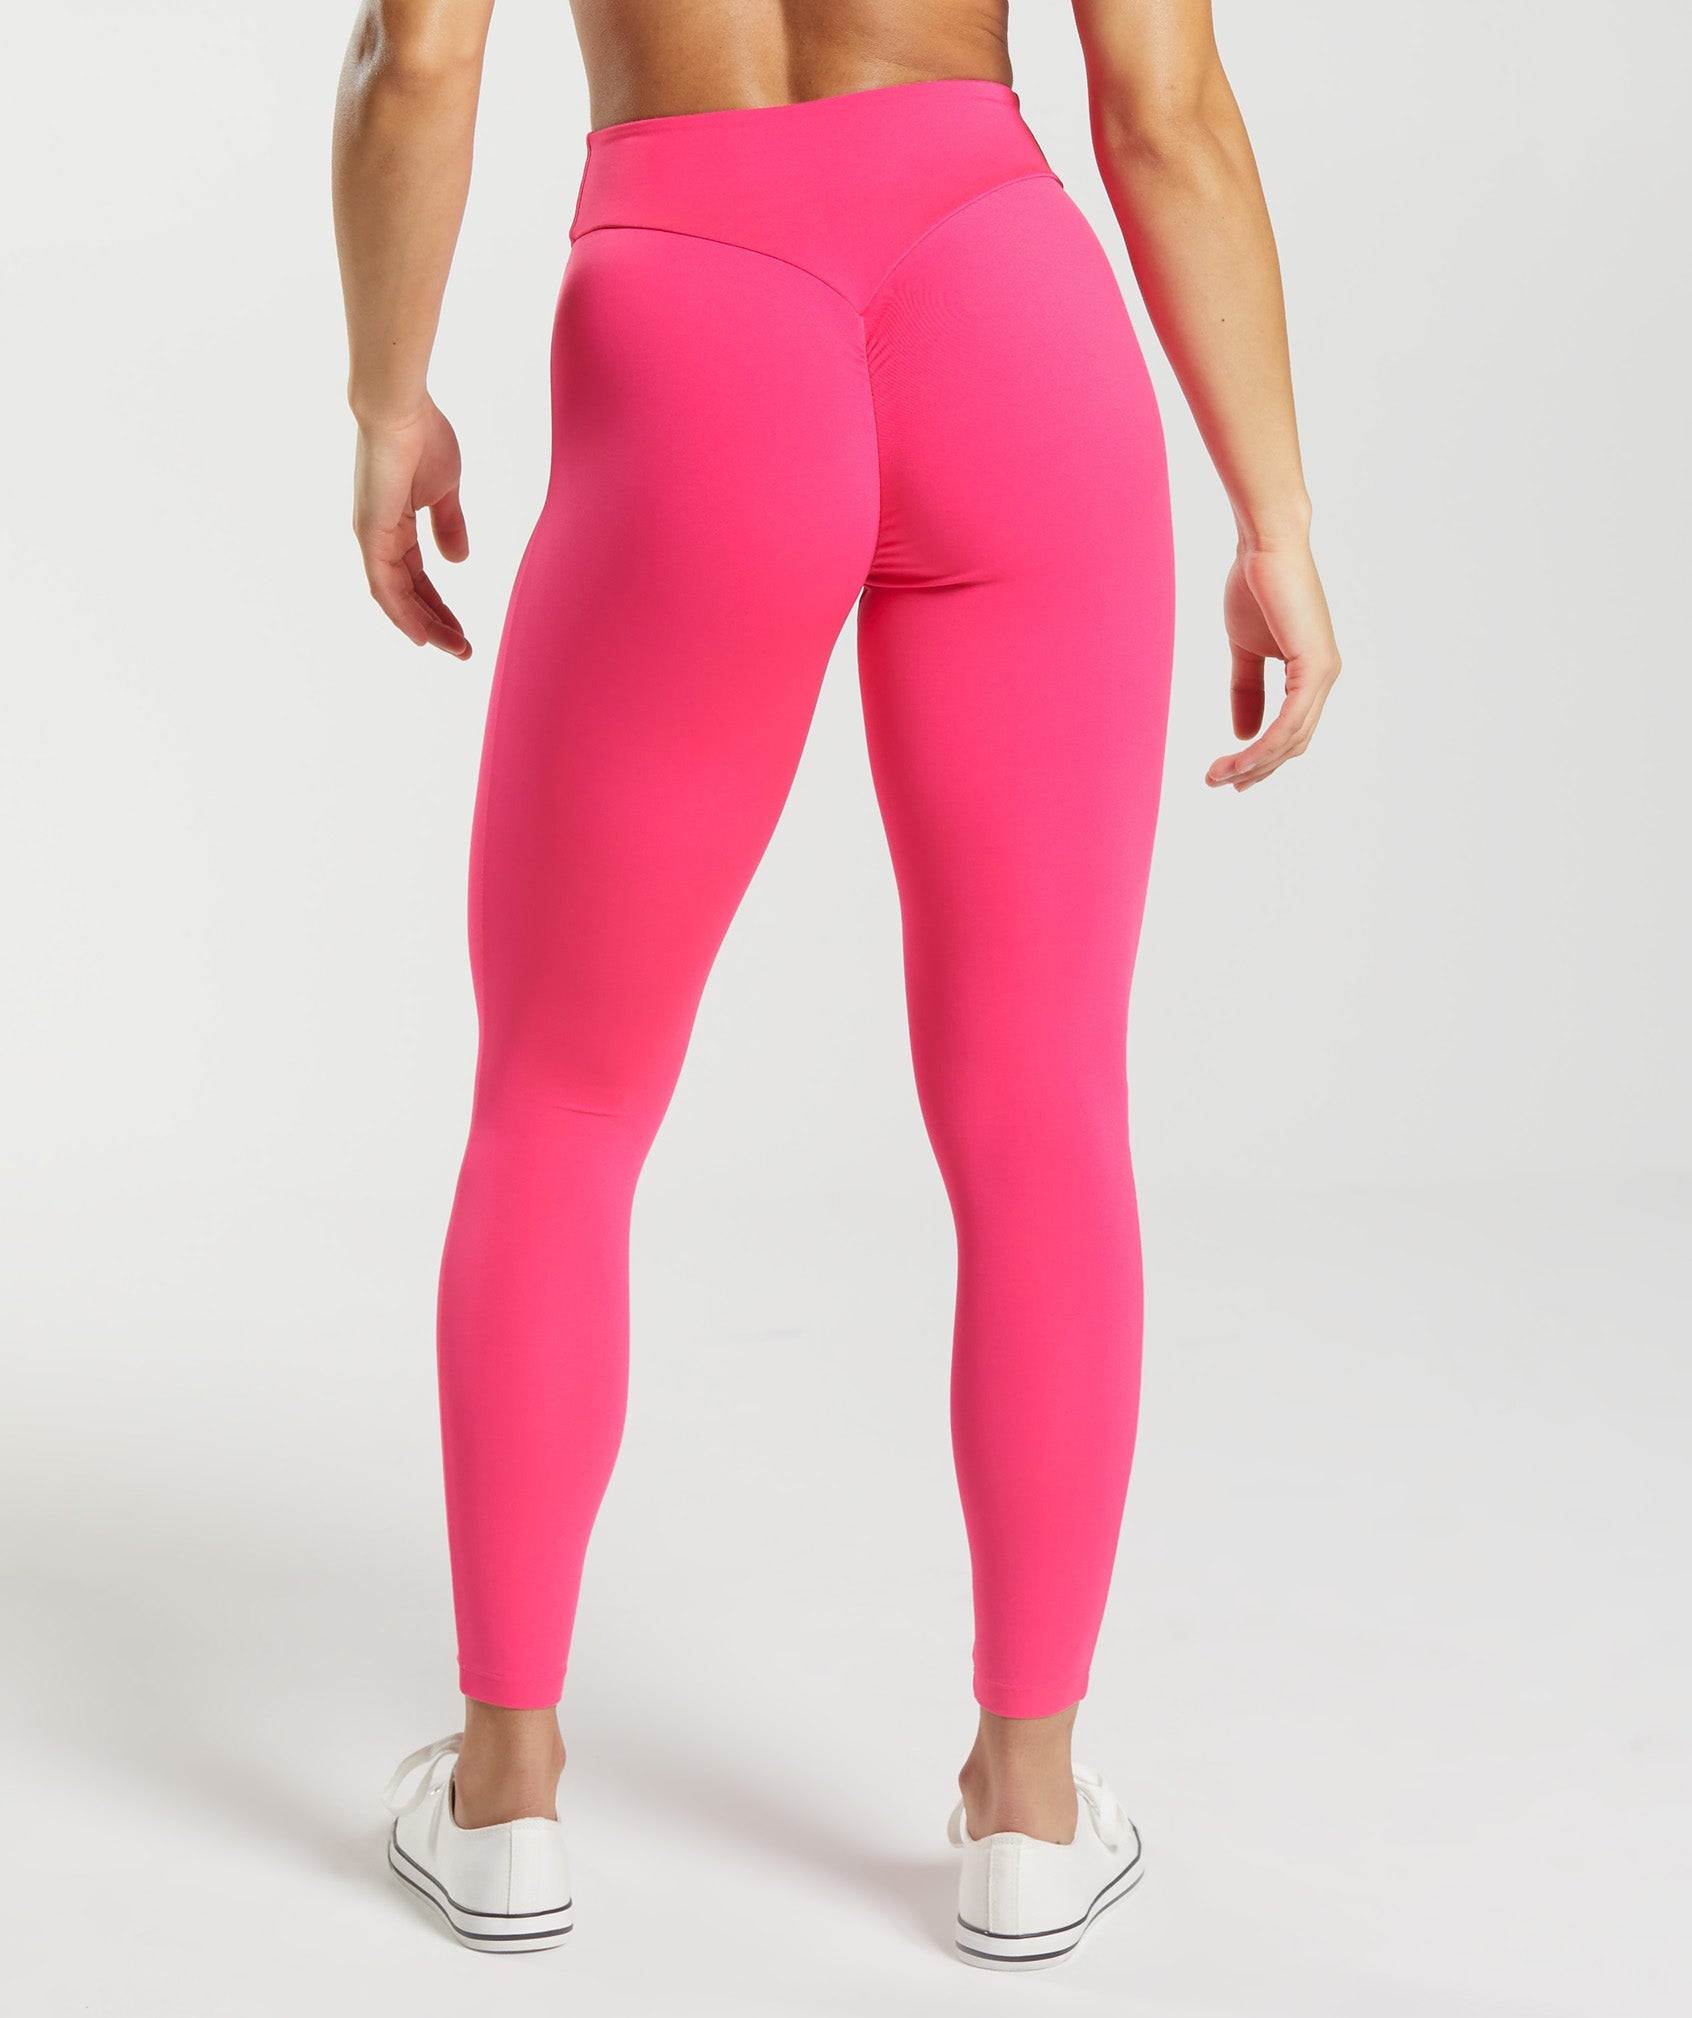 Gymshark Adapt Sealess Leggings - Red/Pink Ombre Speckle Size XL